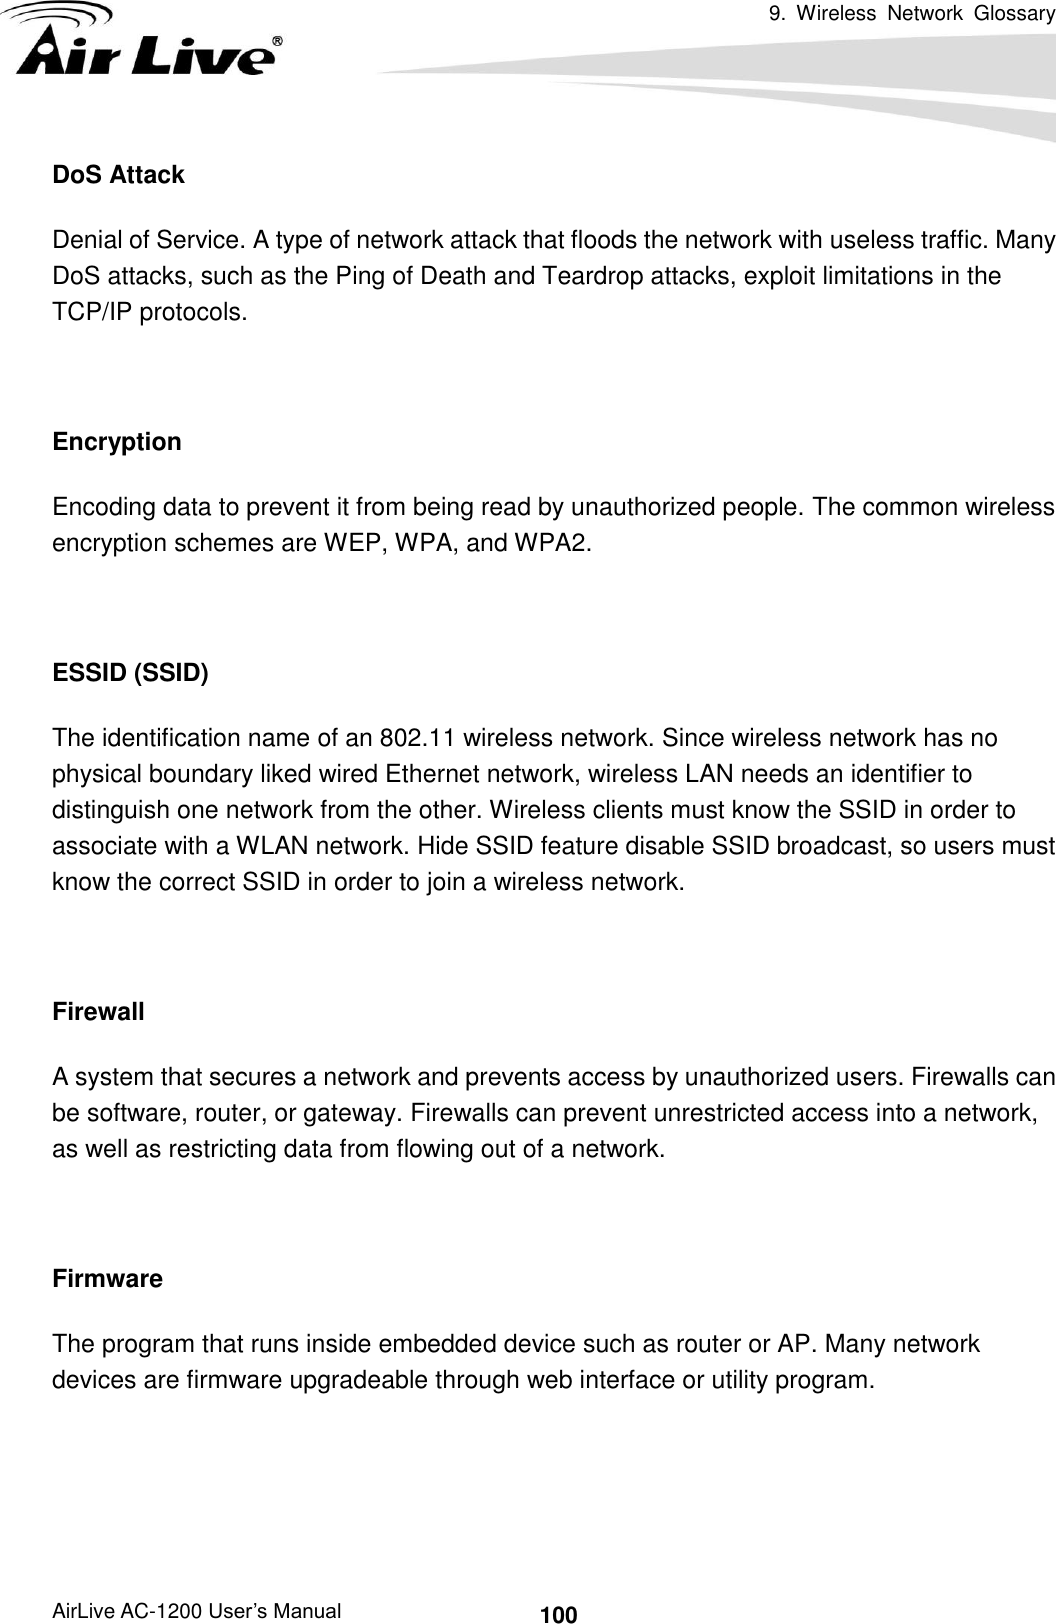 9.  Wireless  Network  Glossary      AirLive AC-1200 User’s Manual 100 DoS Attack Denial of Service. A type of network attack that floods the network with useless traffic. Many DoS attacks, such as the Ping of Death and Teardrop attacks, exploit limitations in the TCP/IP protocols.  Encryption Encoding data to prevent it from being read by unauthorized people. The common wireless encryption schemes are WEP, WPA, and WPA2.  ESSID (SSID) The identification name of an 802.11 wireless network. Since wireless network has no physical boundary liked wired Ethernet network, wireless LAN needs an identifier to distinguish one network from the other. Wireless clients must know the SSID in order to associate with a WLAN network. Hide SSID feature disable SSID broadcast, so users must know the correct SSID in order to join a wireless network.  Firewall A system that secures a network and prevents access by unauthorized users. Firewalls can be software, router, or gateway. Firewalls can prevent unrestricted access into a network, as well as restricting data from flowing out of a network.  Firmware The program that runs inside embedded device such as router or AP. Many network devices are firmware upgradeable through web interface or utility program.   